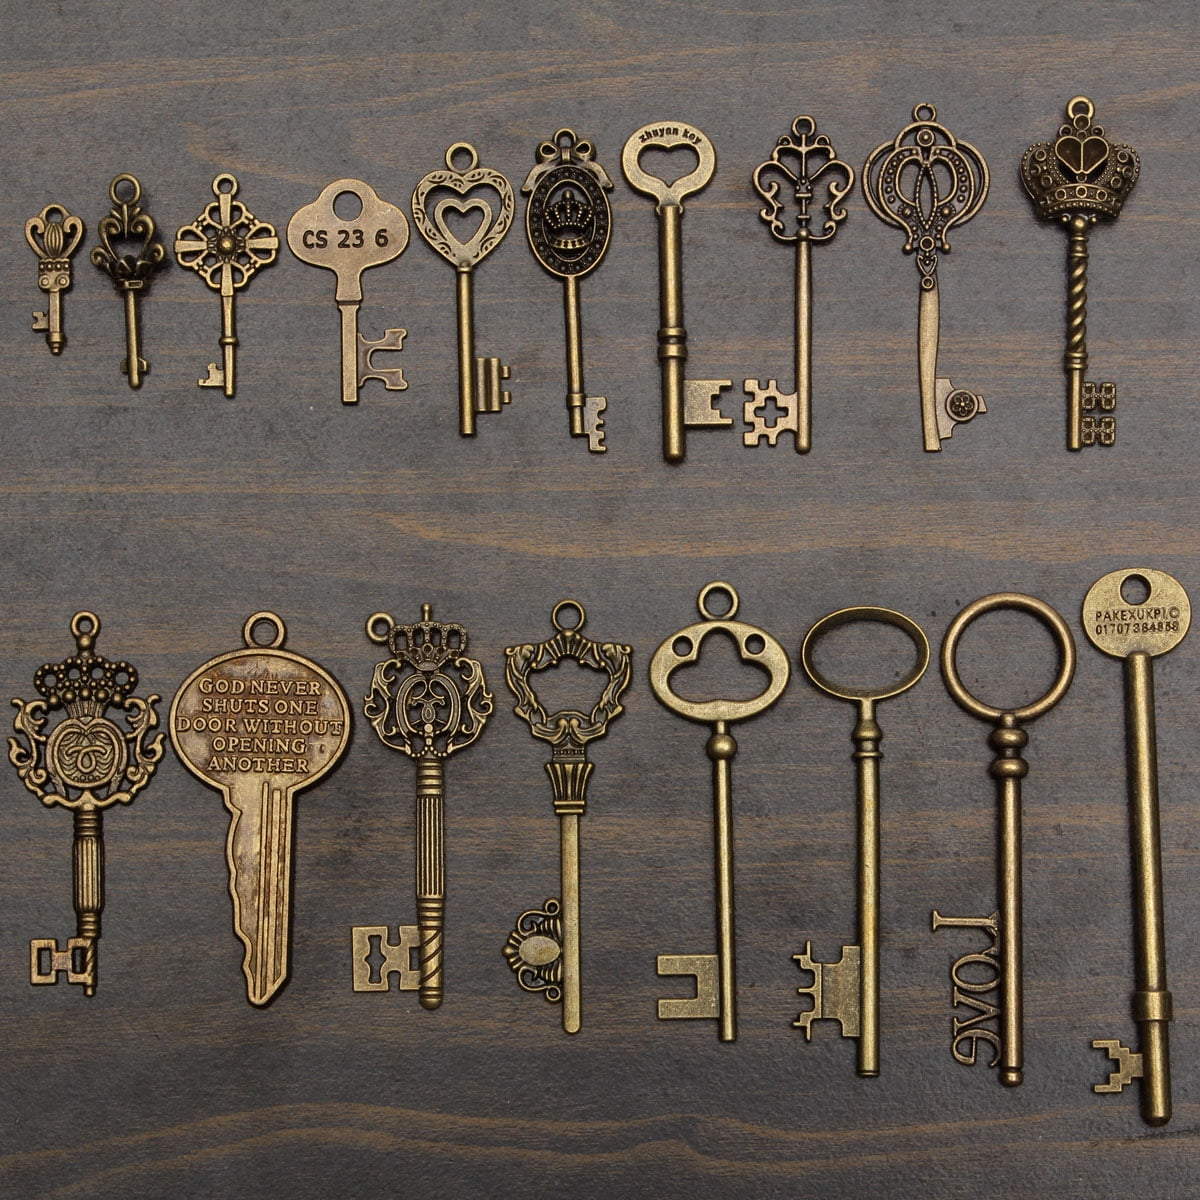 5-100 Bronze Vintage Look key Charms for Craft & Scrapbooking